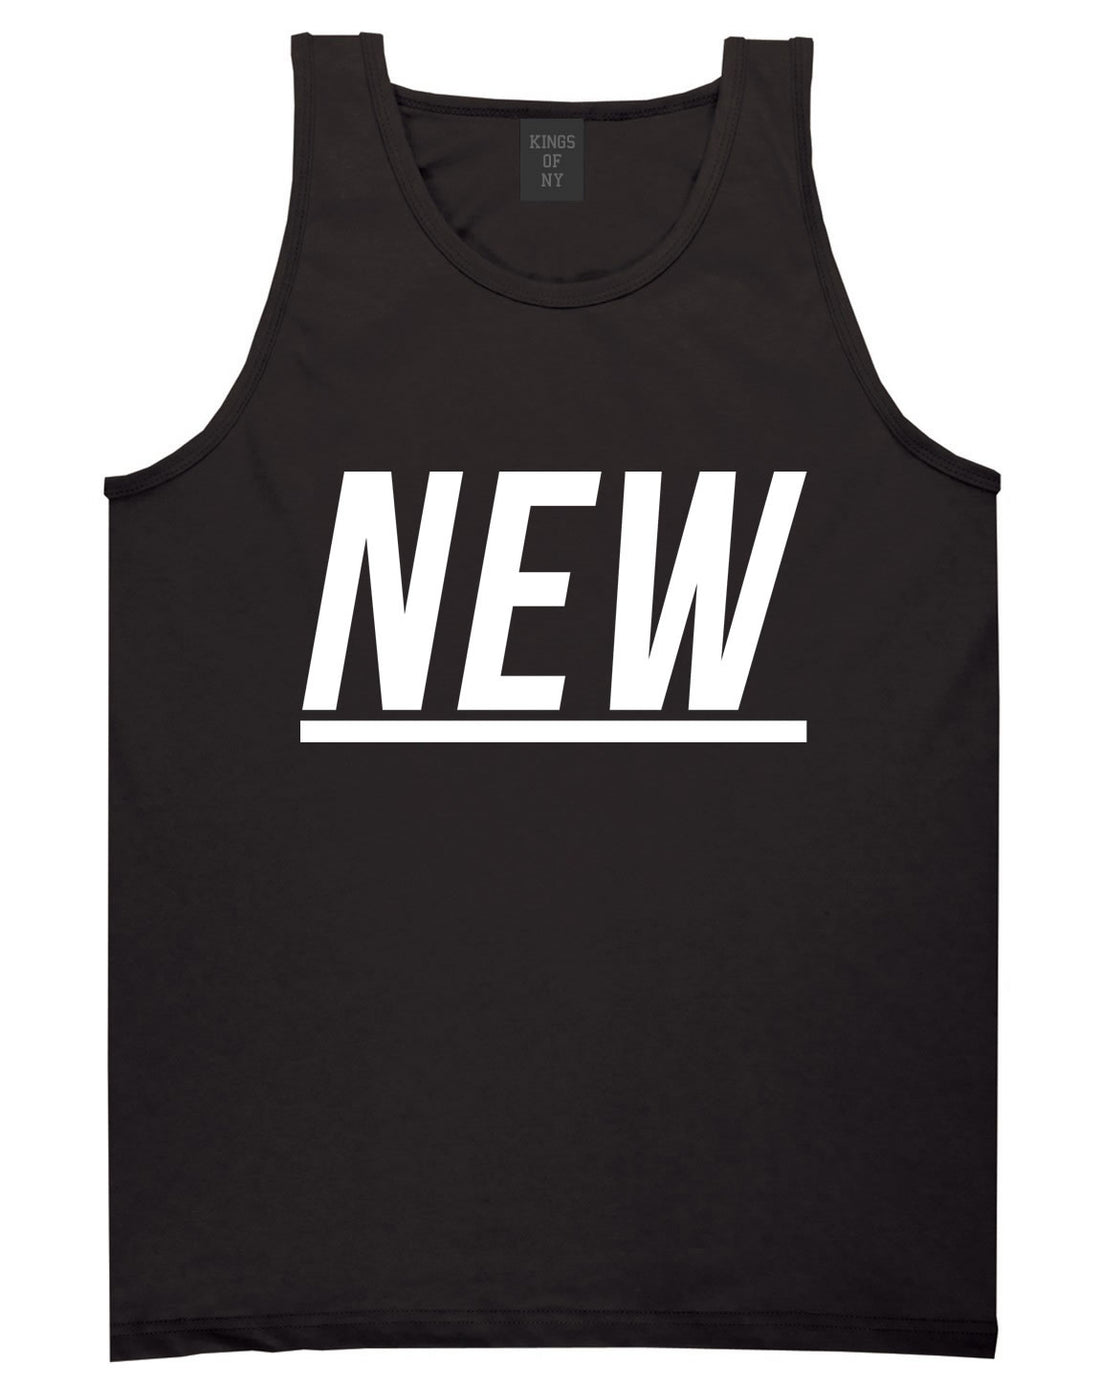 New Tank Top in Black by Kings Of NY